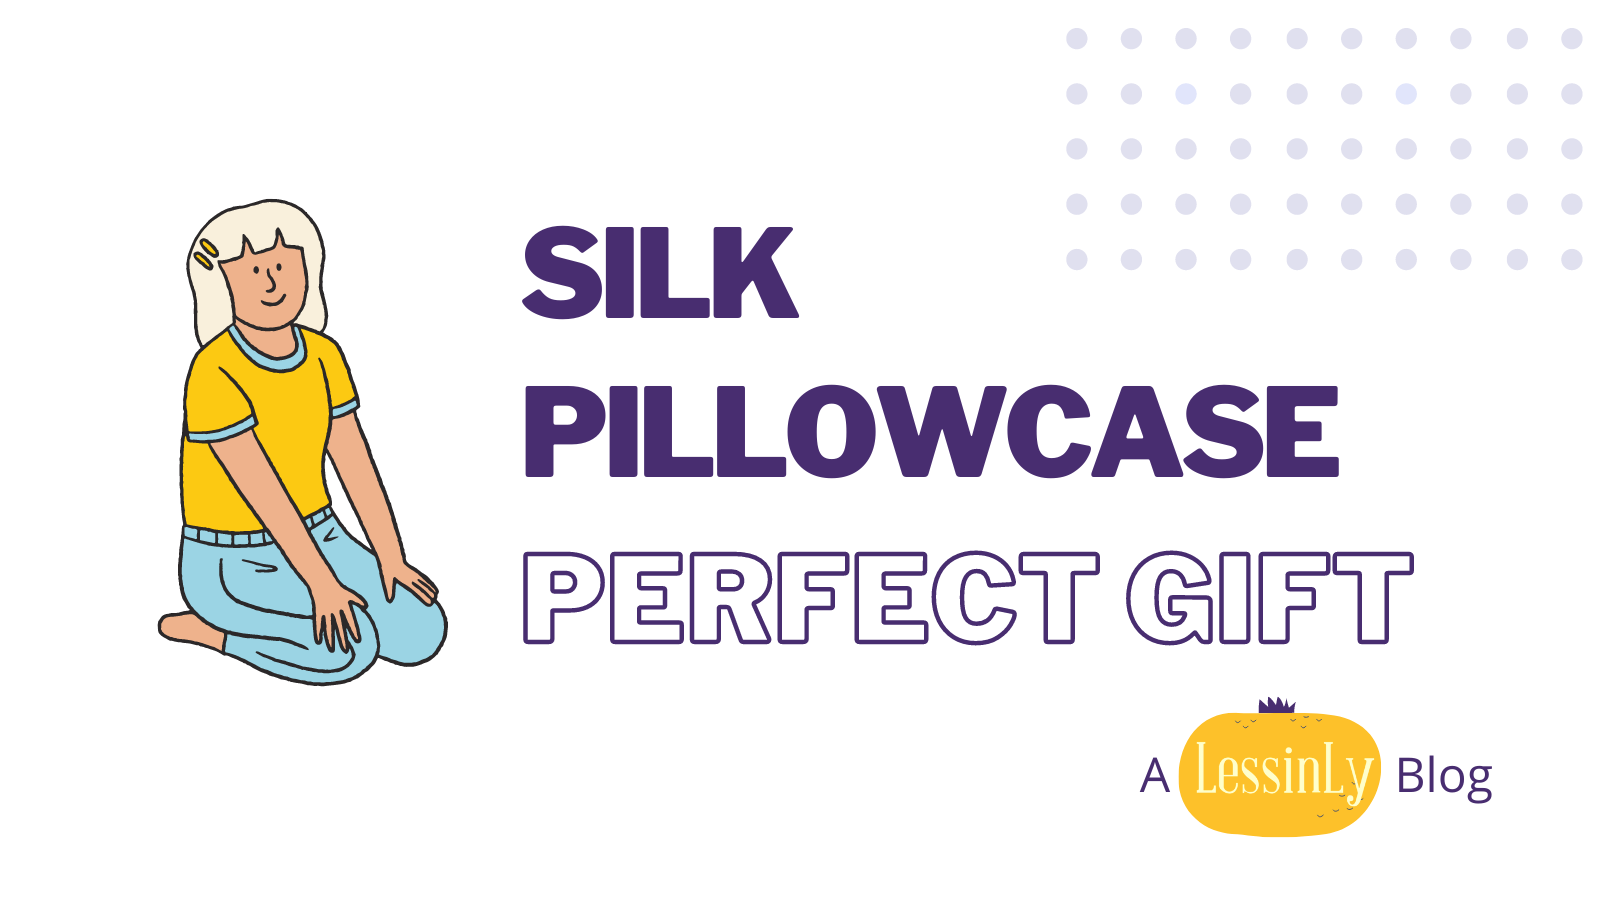 12 Reasons Why Silk Pillowcases Are The Perfect Gifts featured image